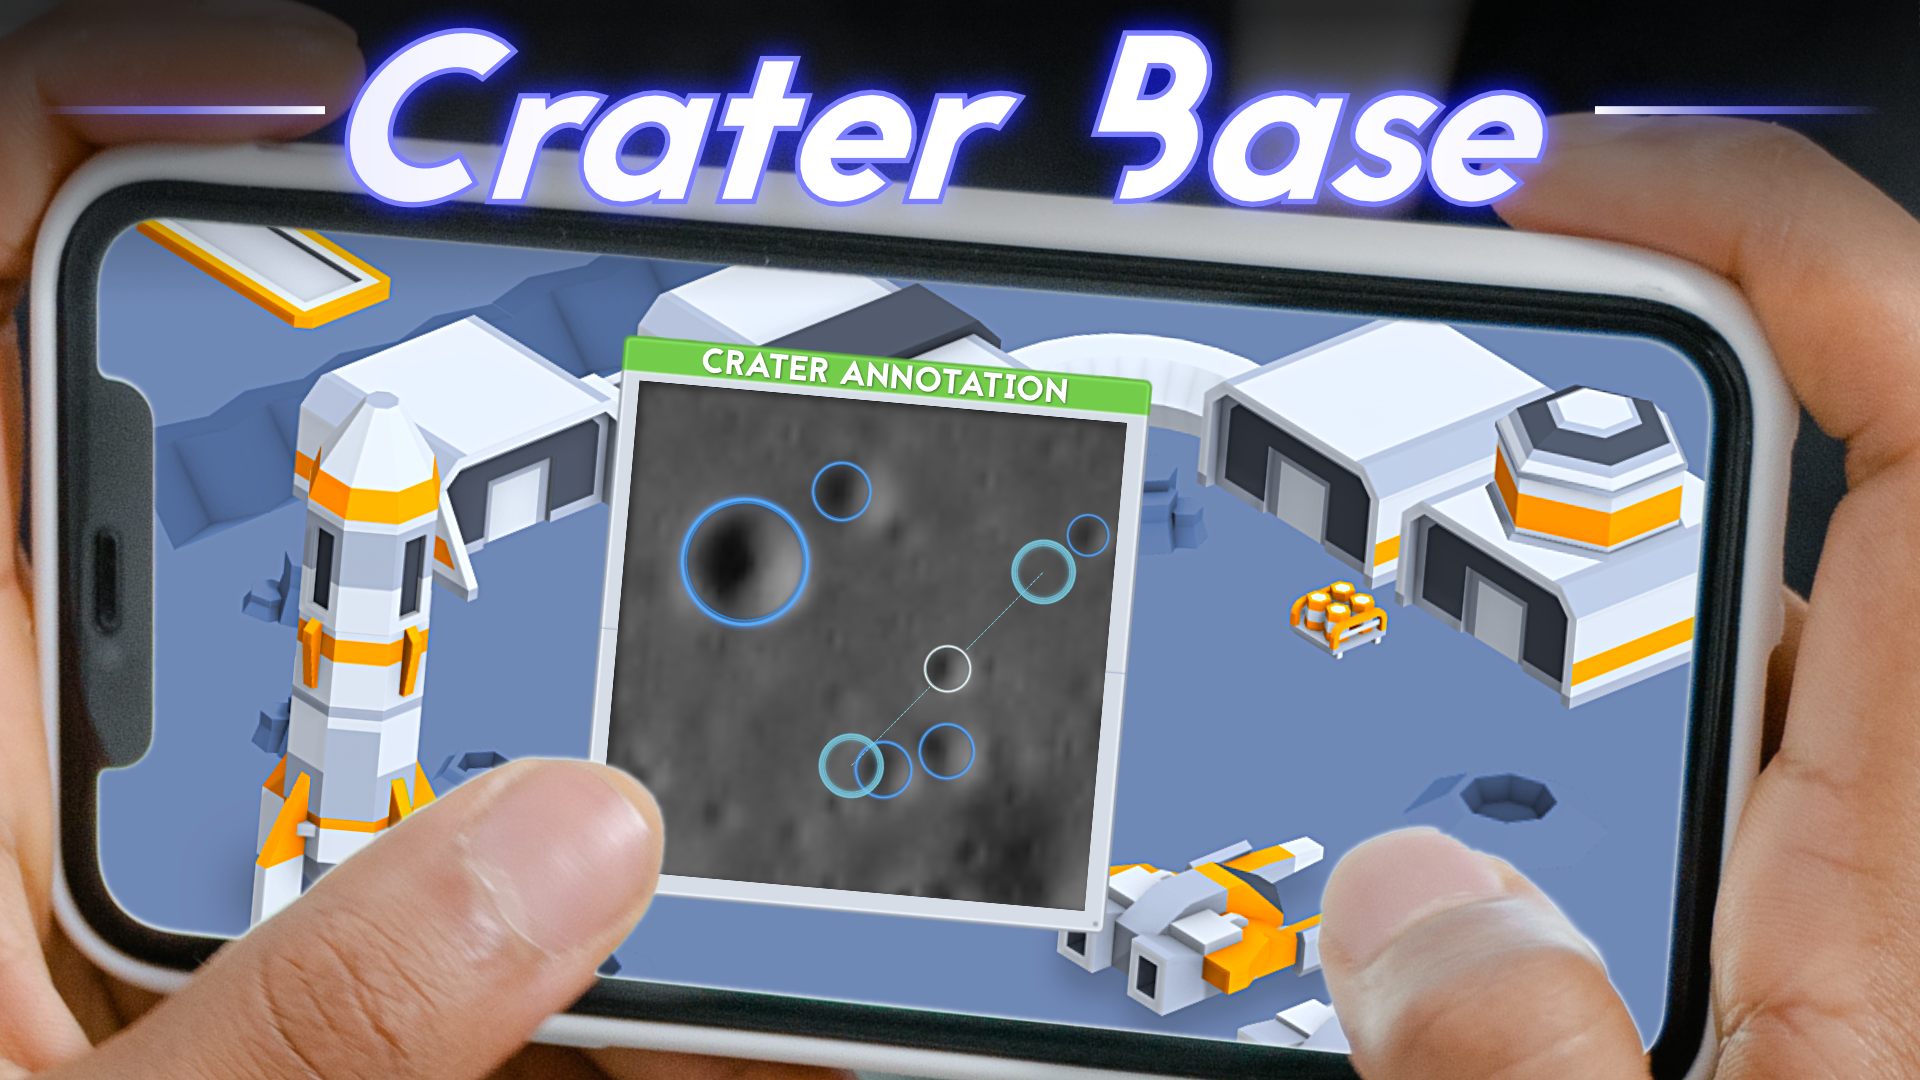 Generating an open AI training data set for Moon craters with crowd science via a videogame